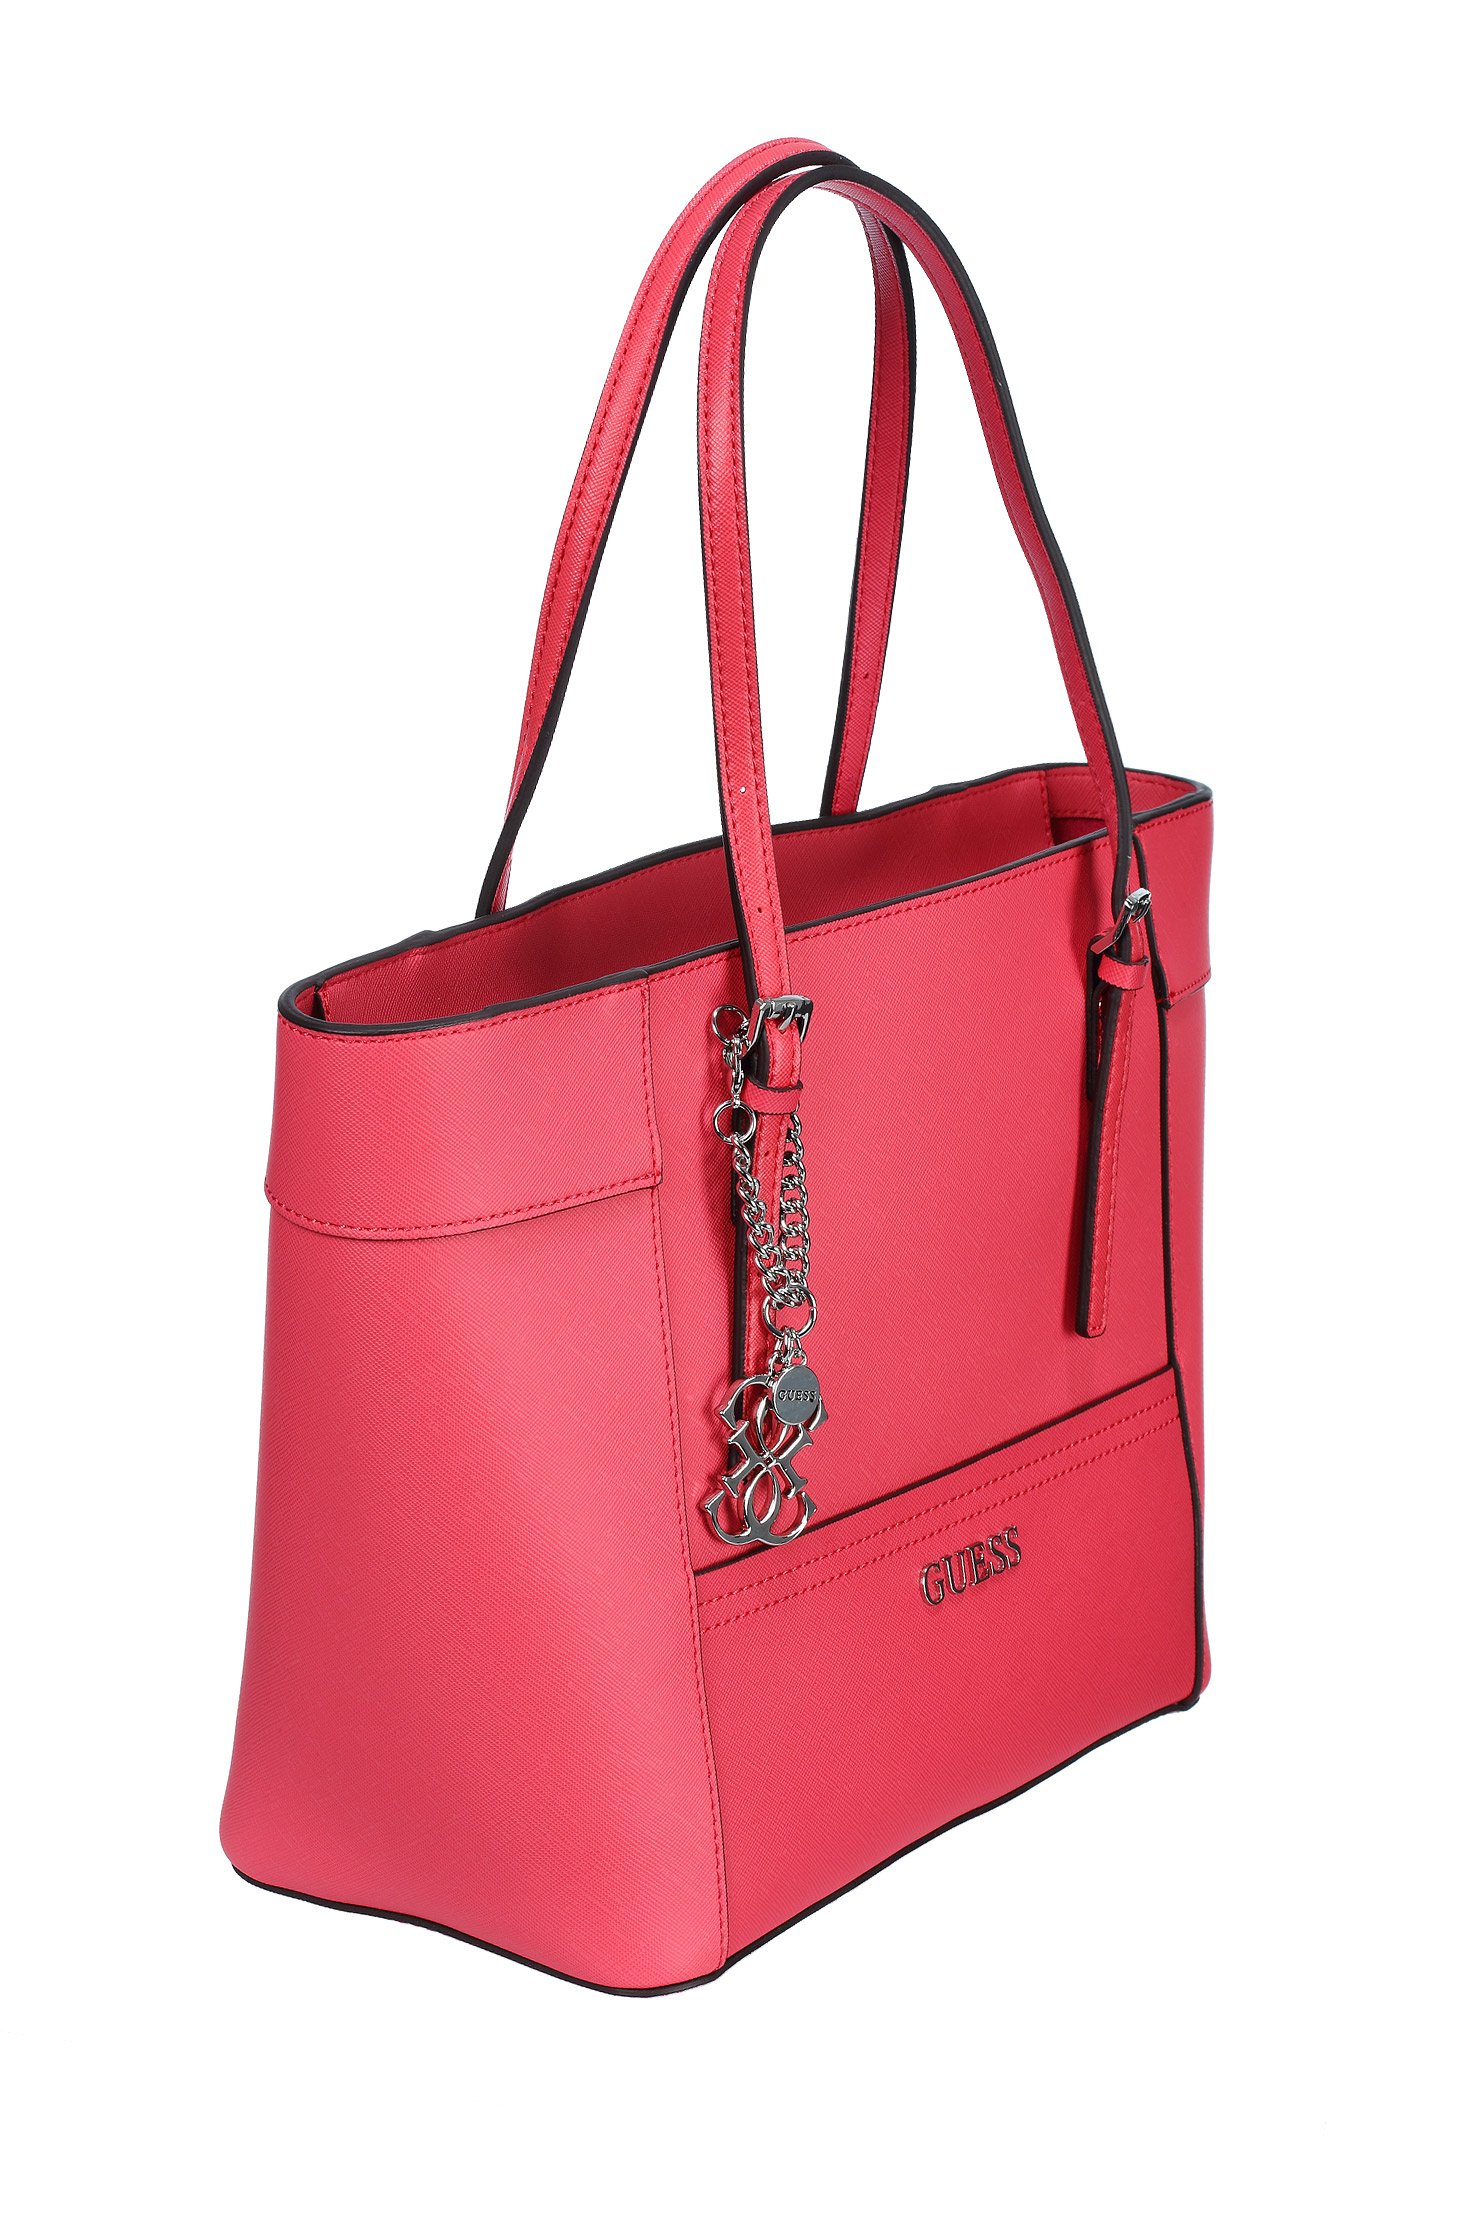 Guess Town Bag Hwvy45 in Pink | Lyst